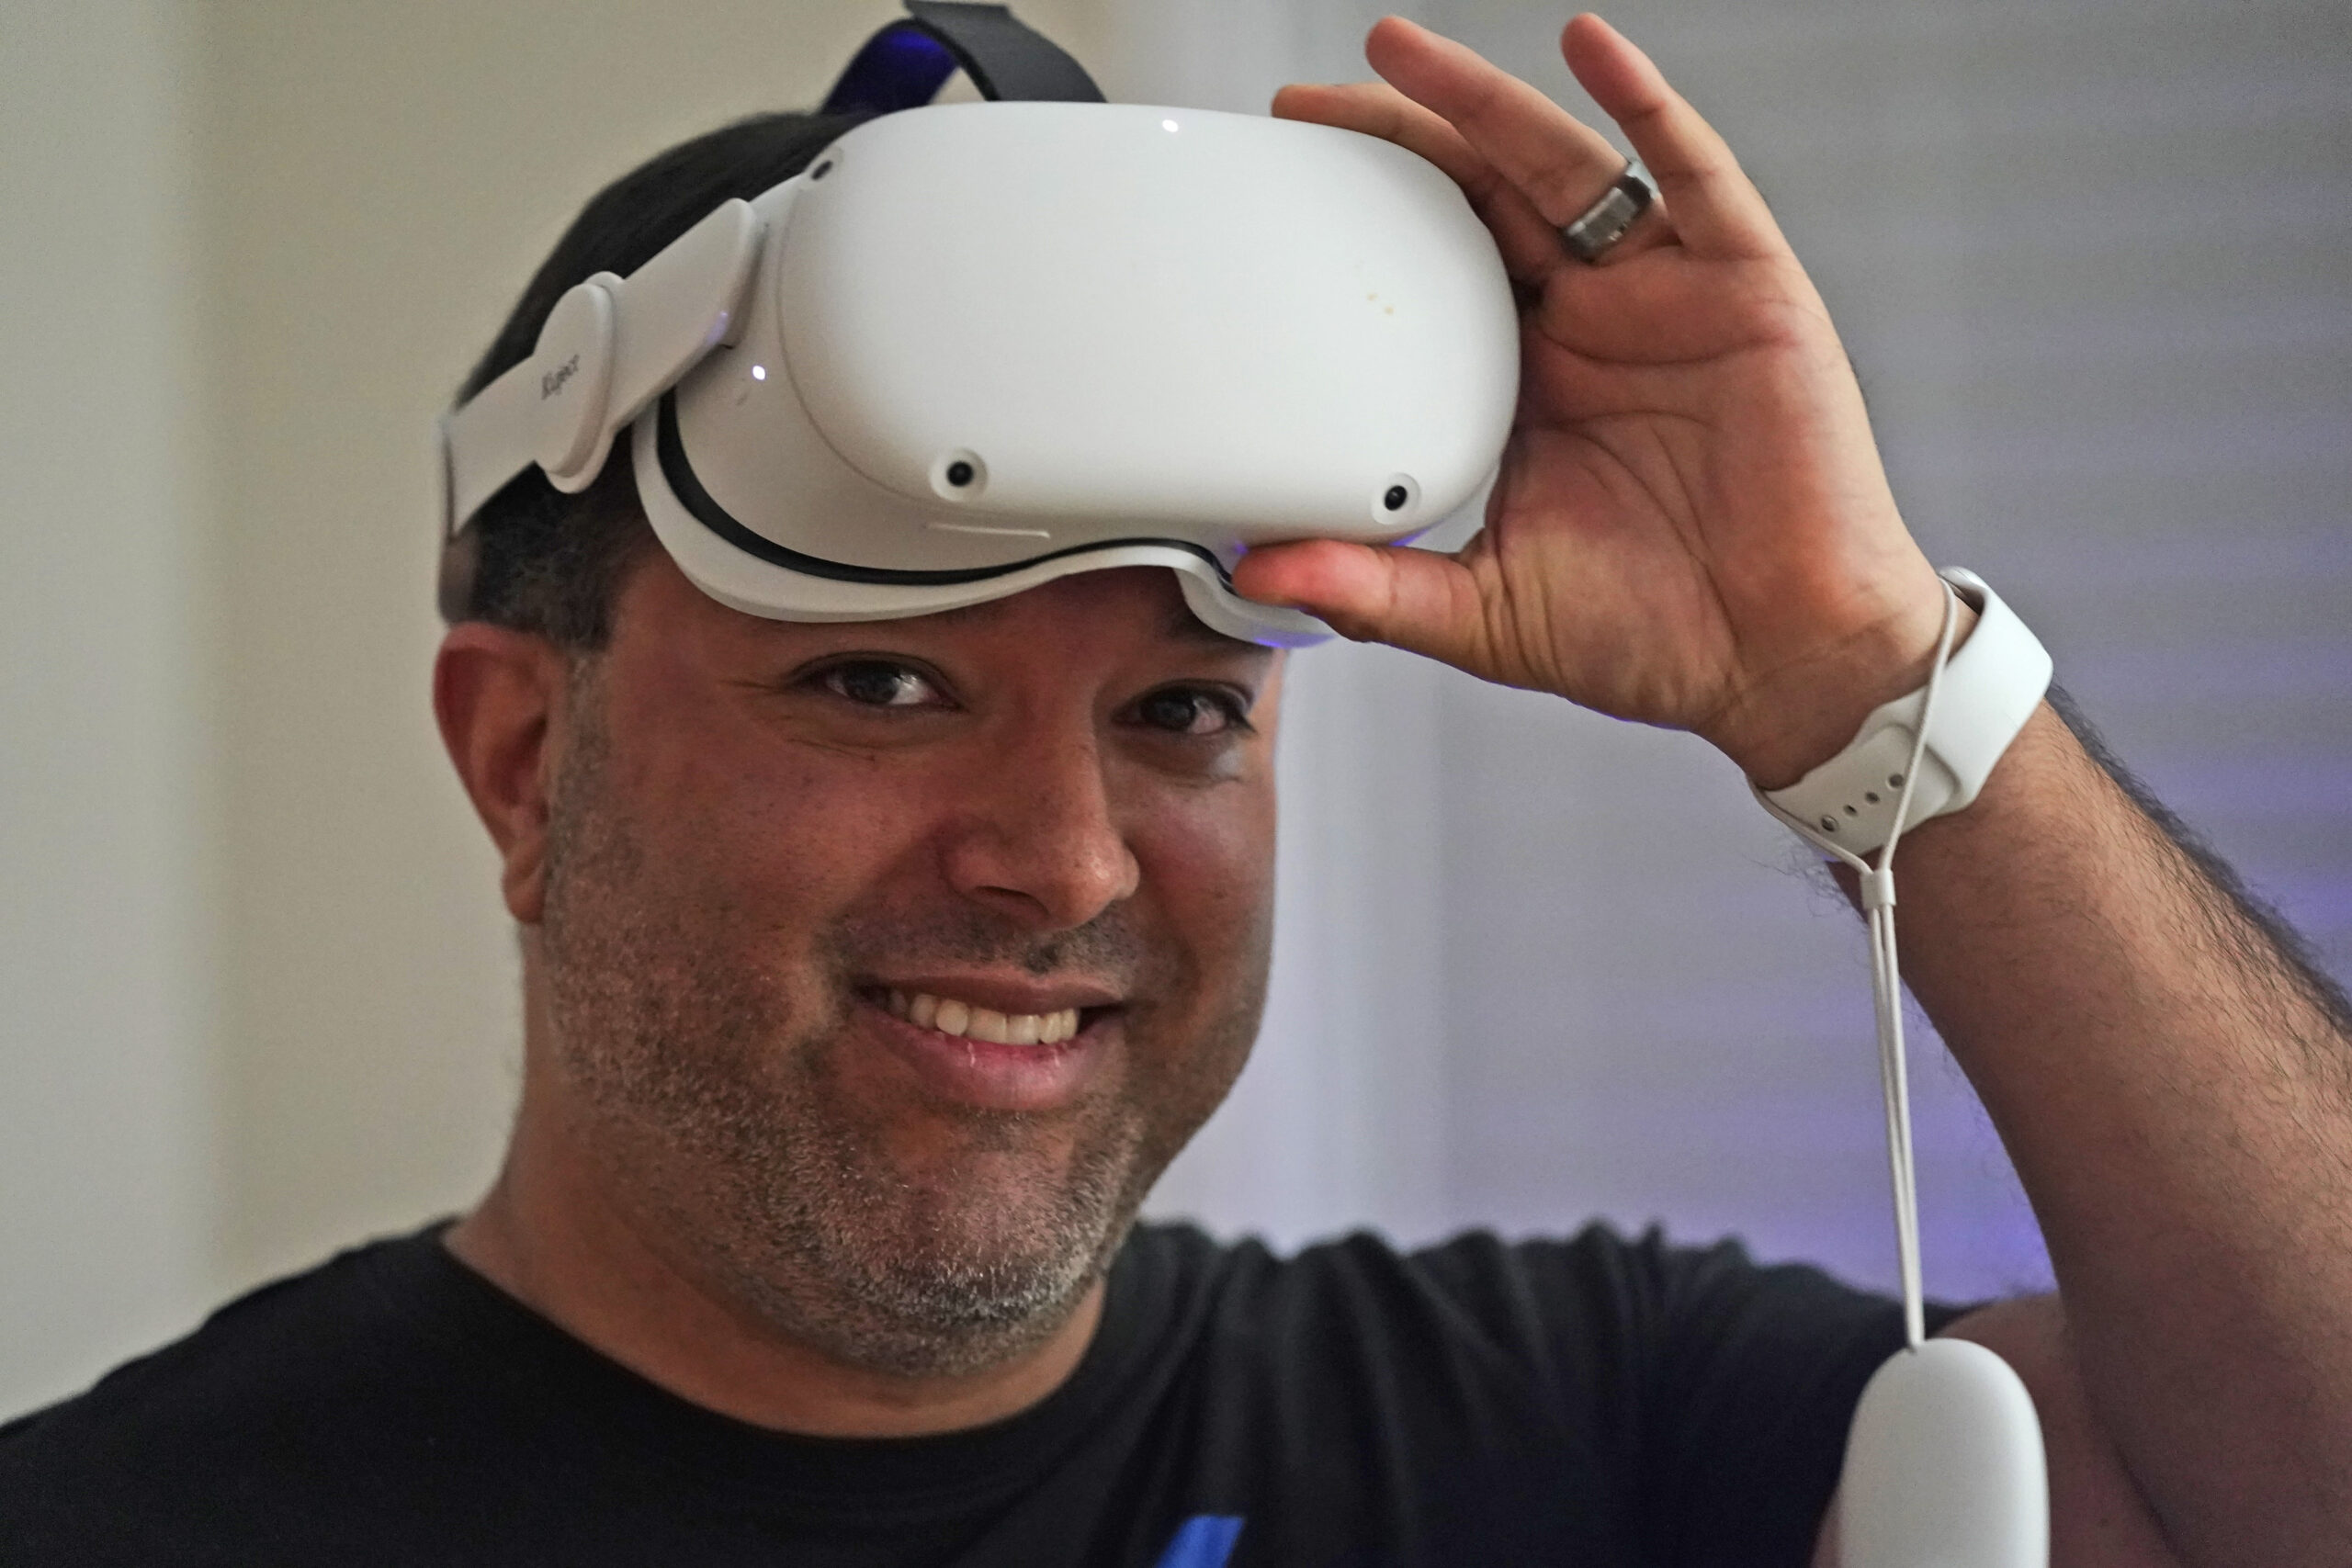 Pastor D.J. Soto, the lead pastor of VR Church, removes his VR goggles after a sermon in his home Sunday Jan. 23, 2022, in Fredericksburg, Va. Soto sings, preaches and performs digital baptisms in the metaverse to a growing congregation of avatars. (AP Photo/Steve Helber)